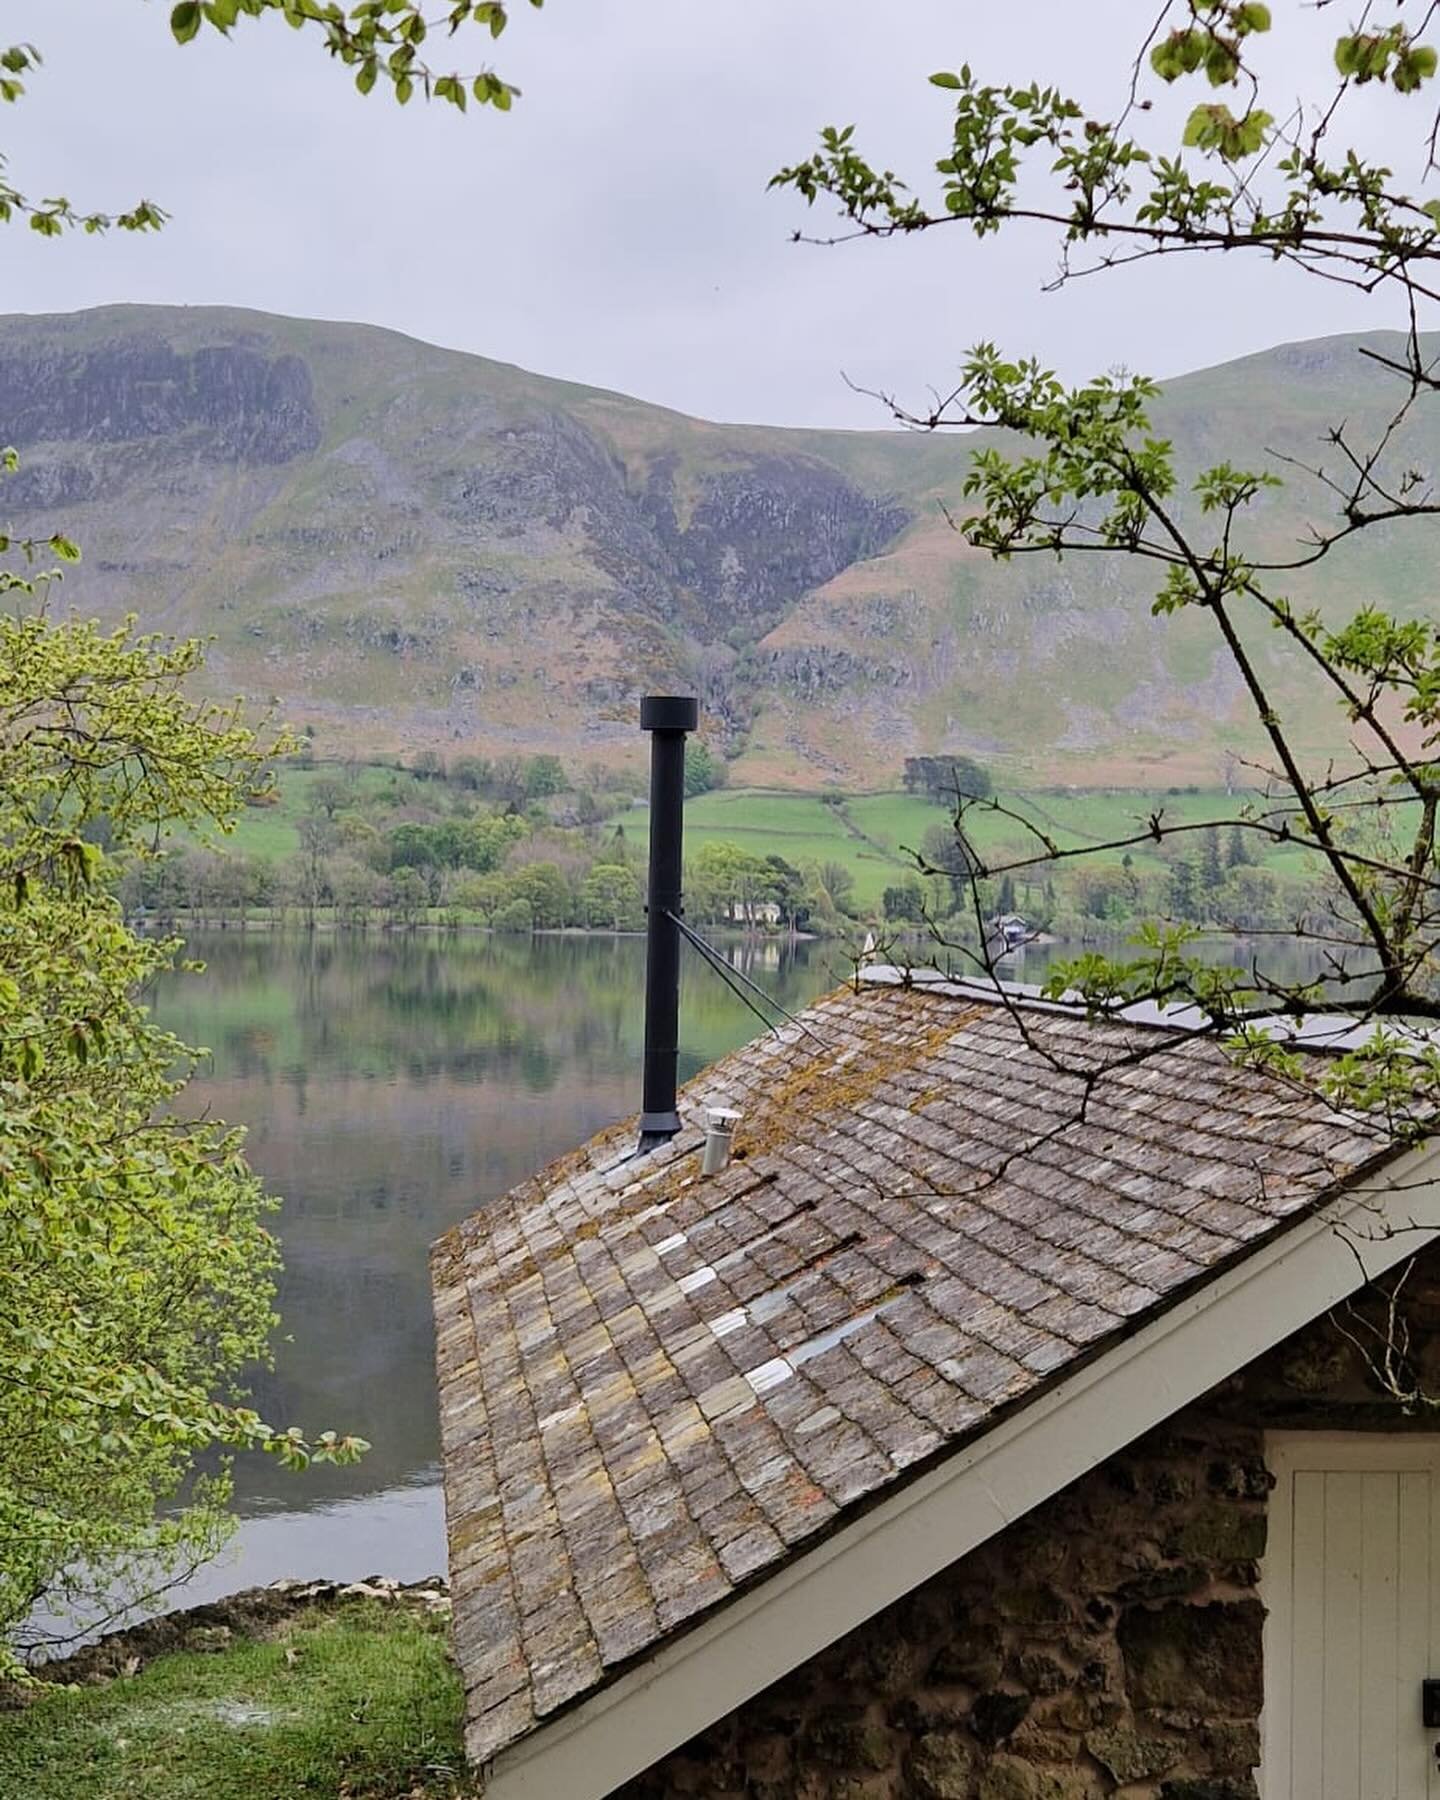 A flue with a view! 
(Caption courtesy of our installer 🤣)

Follow up to our boathouse install pics - here is the finished product. A Termatech TT20R 5kw woodburning stove set on a honed granite segmented hearth. 

#ullswater #woodburning #heating #